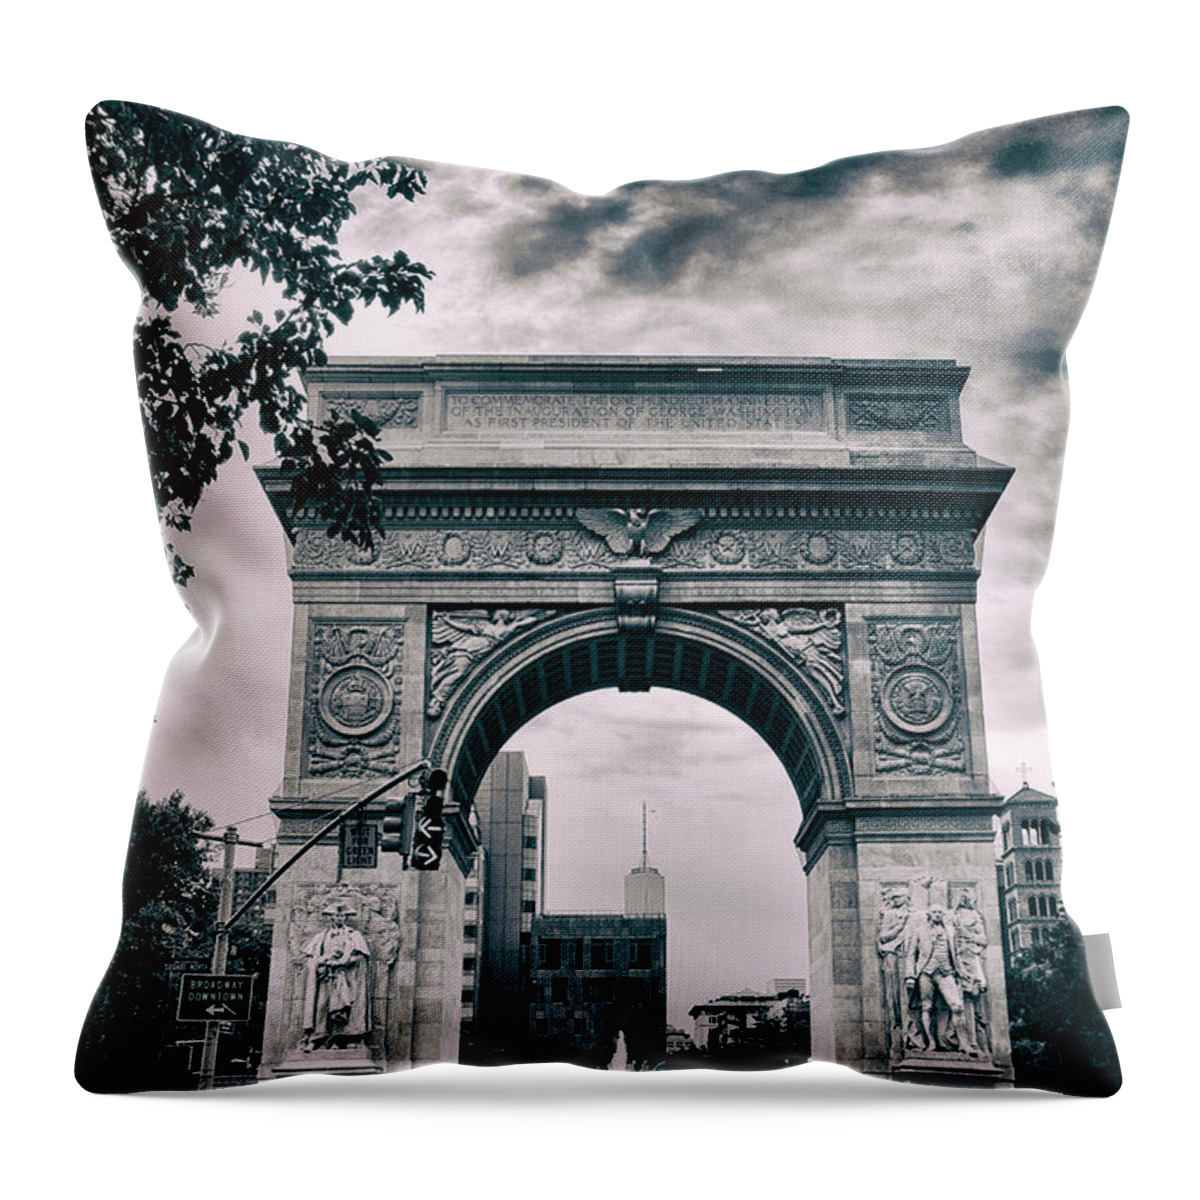 Architecture Throw Pillow featuring the photograph Washington Square Arch by Jessica Jenney